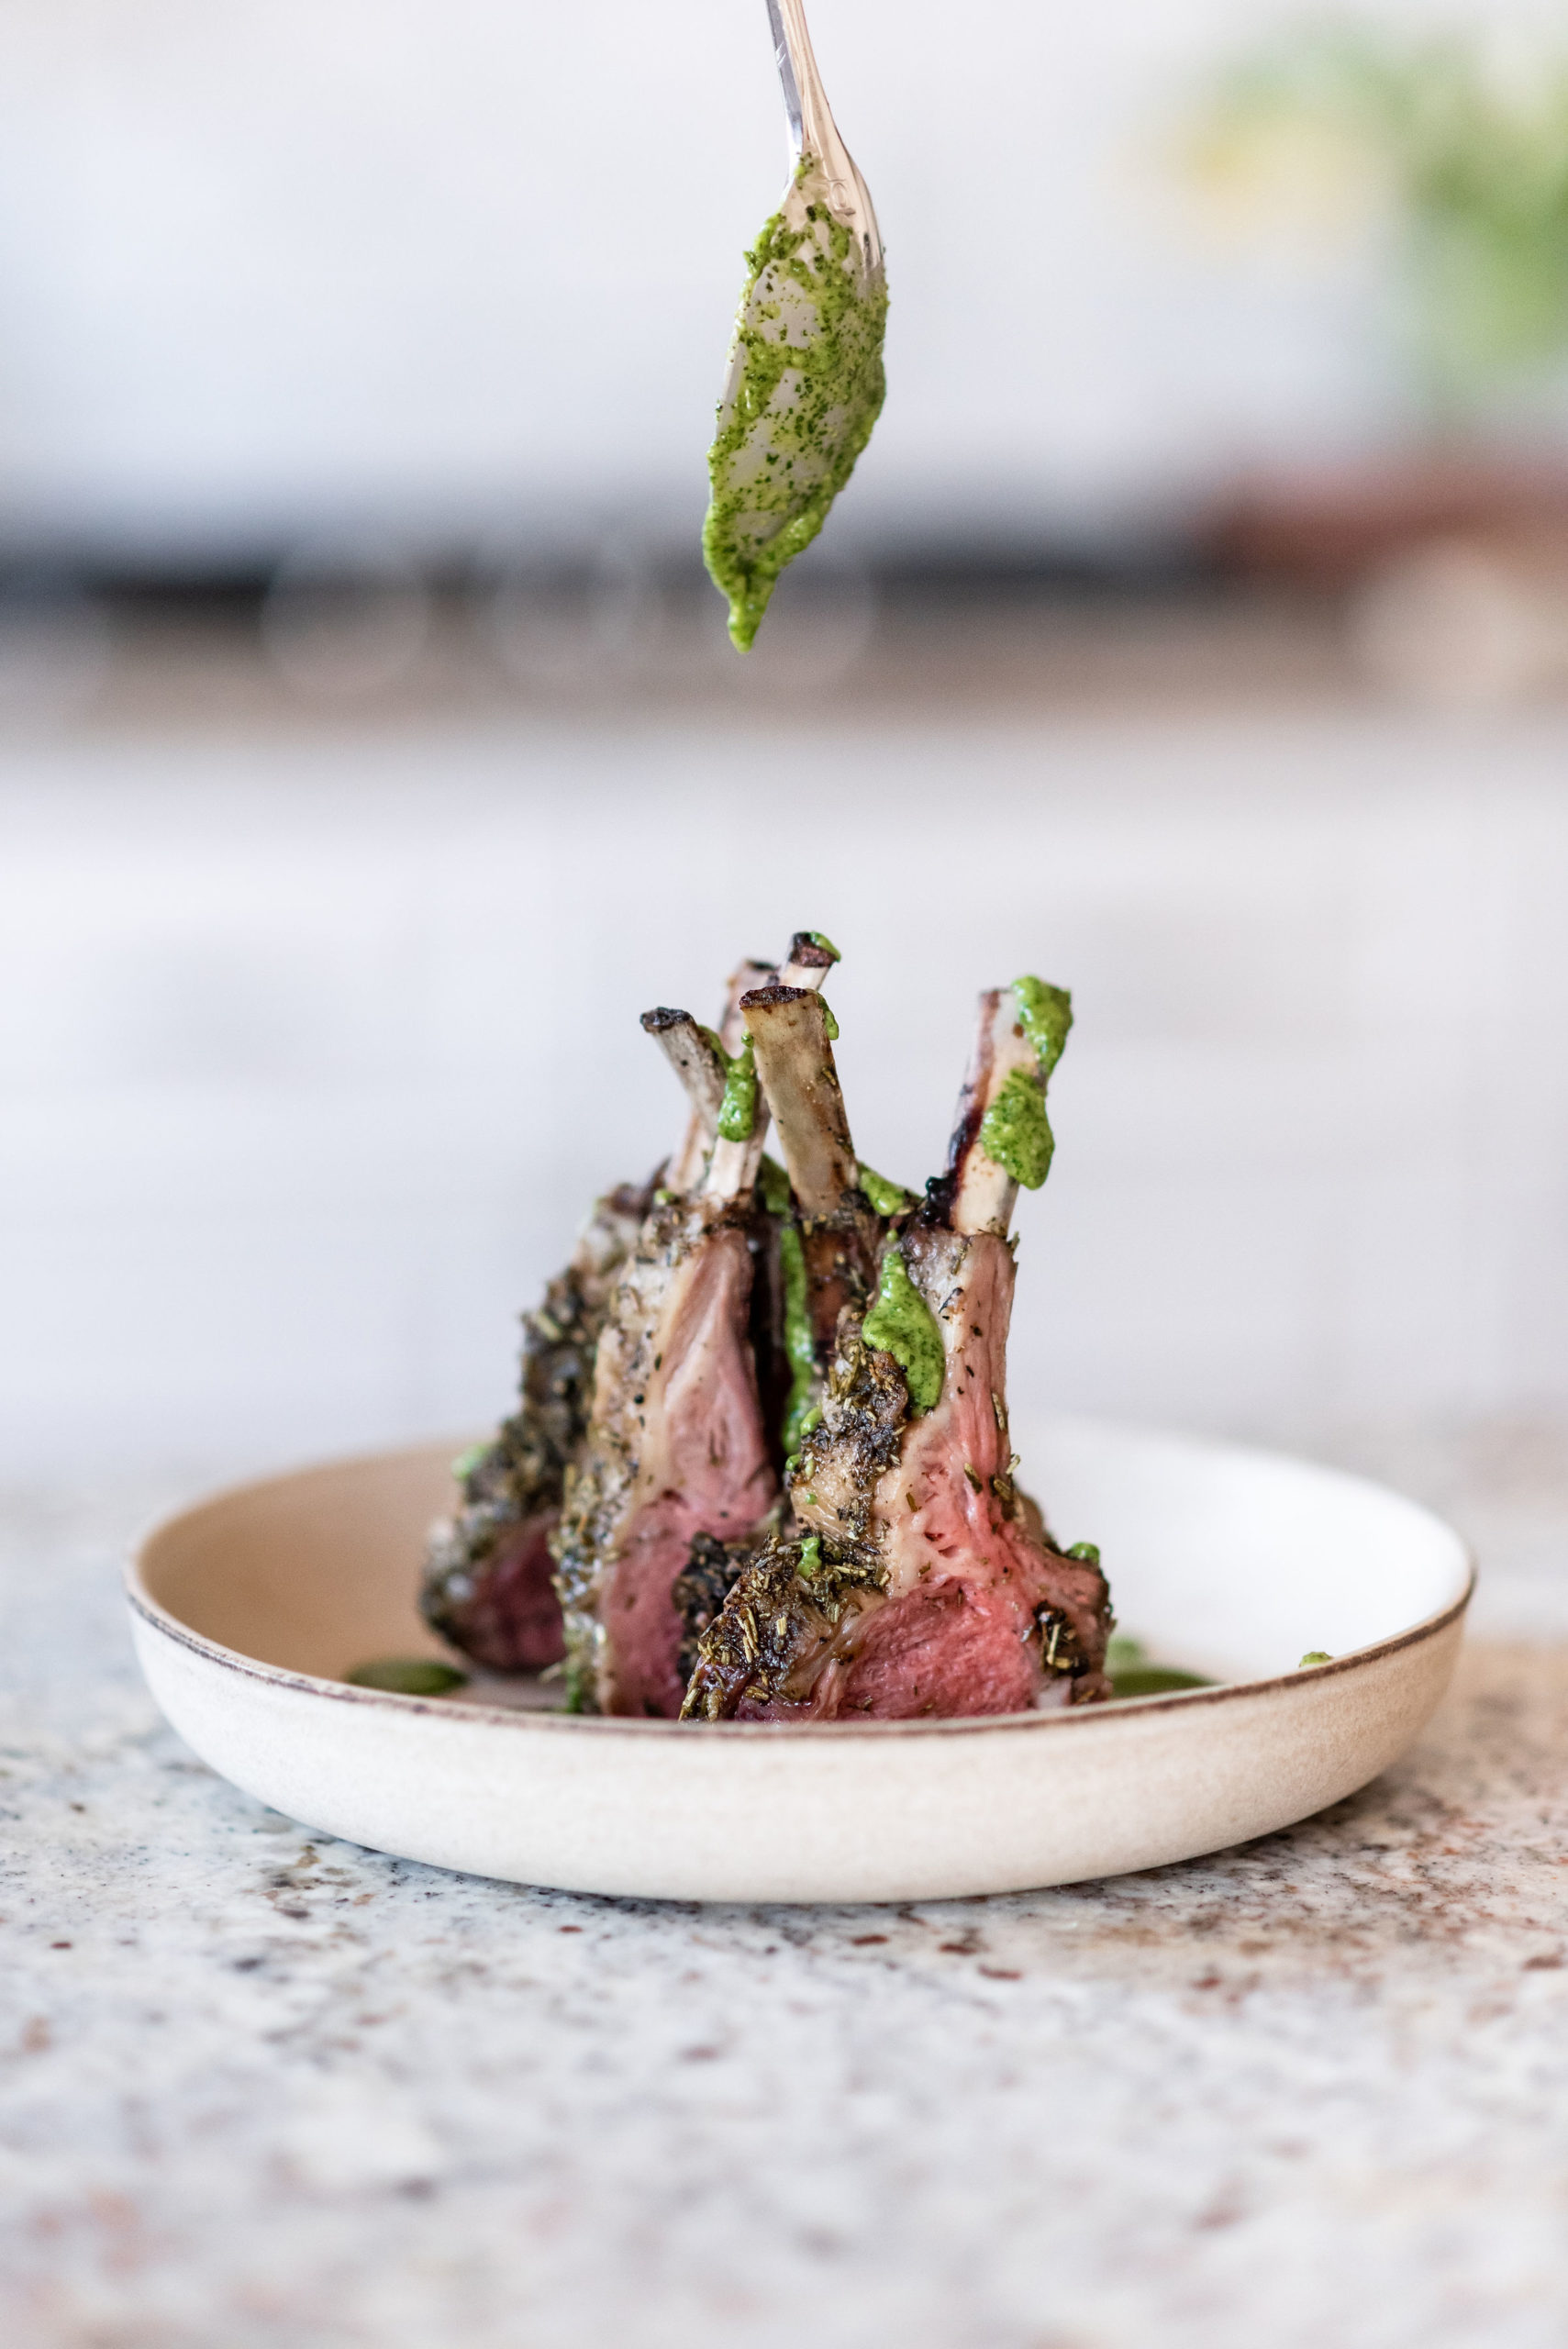 https://www.rosalynndaniels.com/wp-content/uploads/2021/03/How-to-cook-a-rack-of-lamb-in-the-oven-or-the-grill-19-scaled.jpg